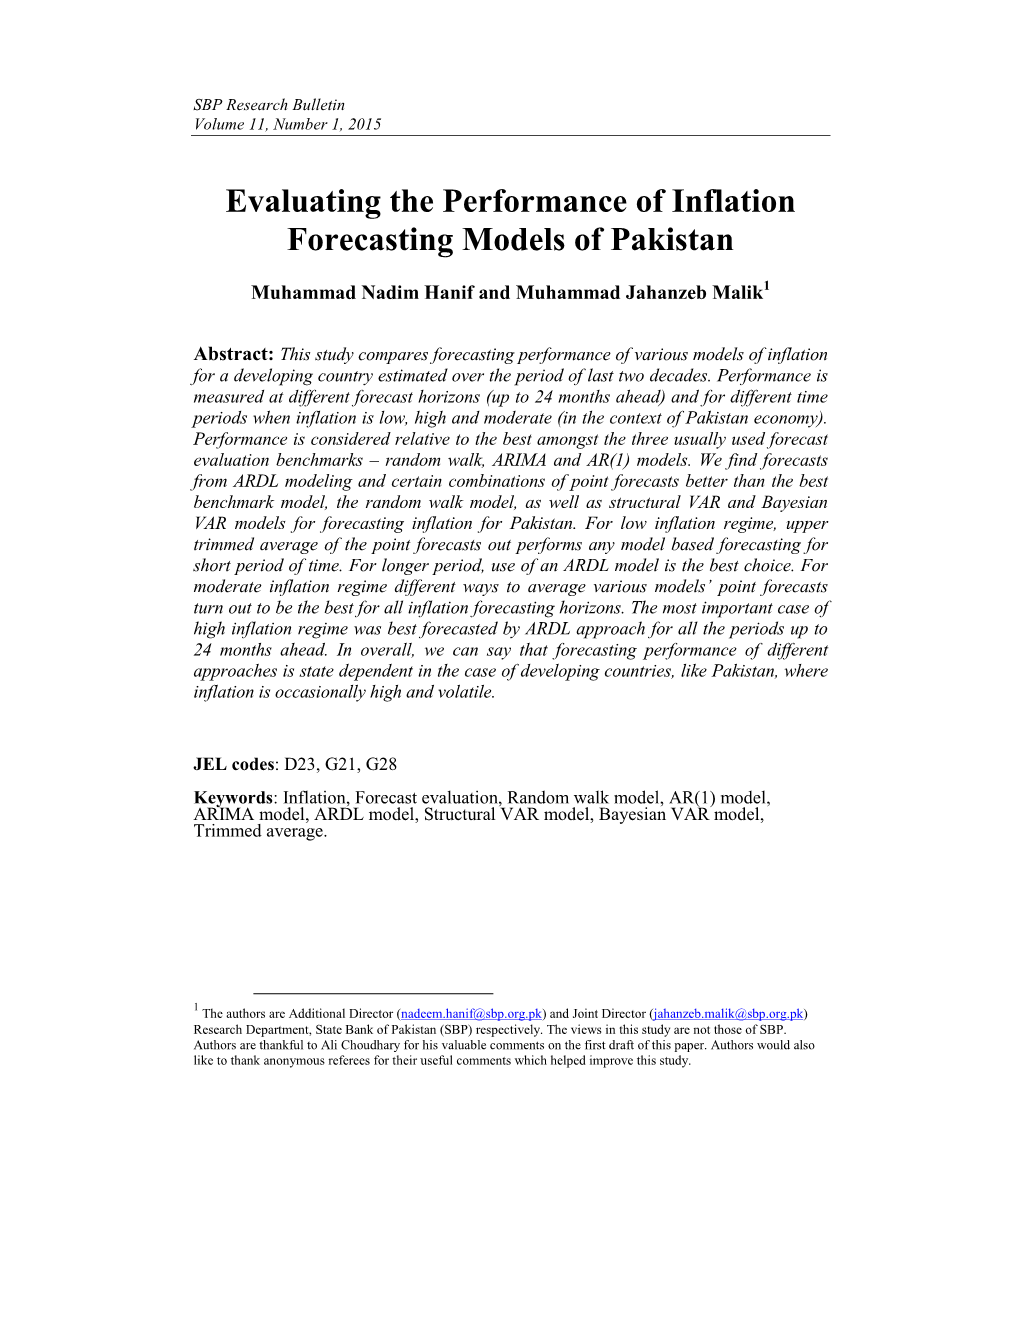 Evaluating the Performance of Inflation Forecasting Models of Pakistan